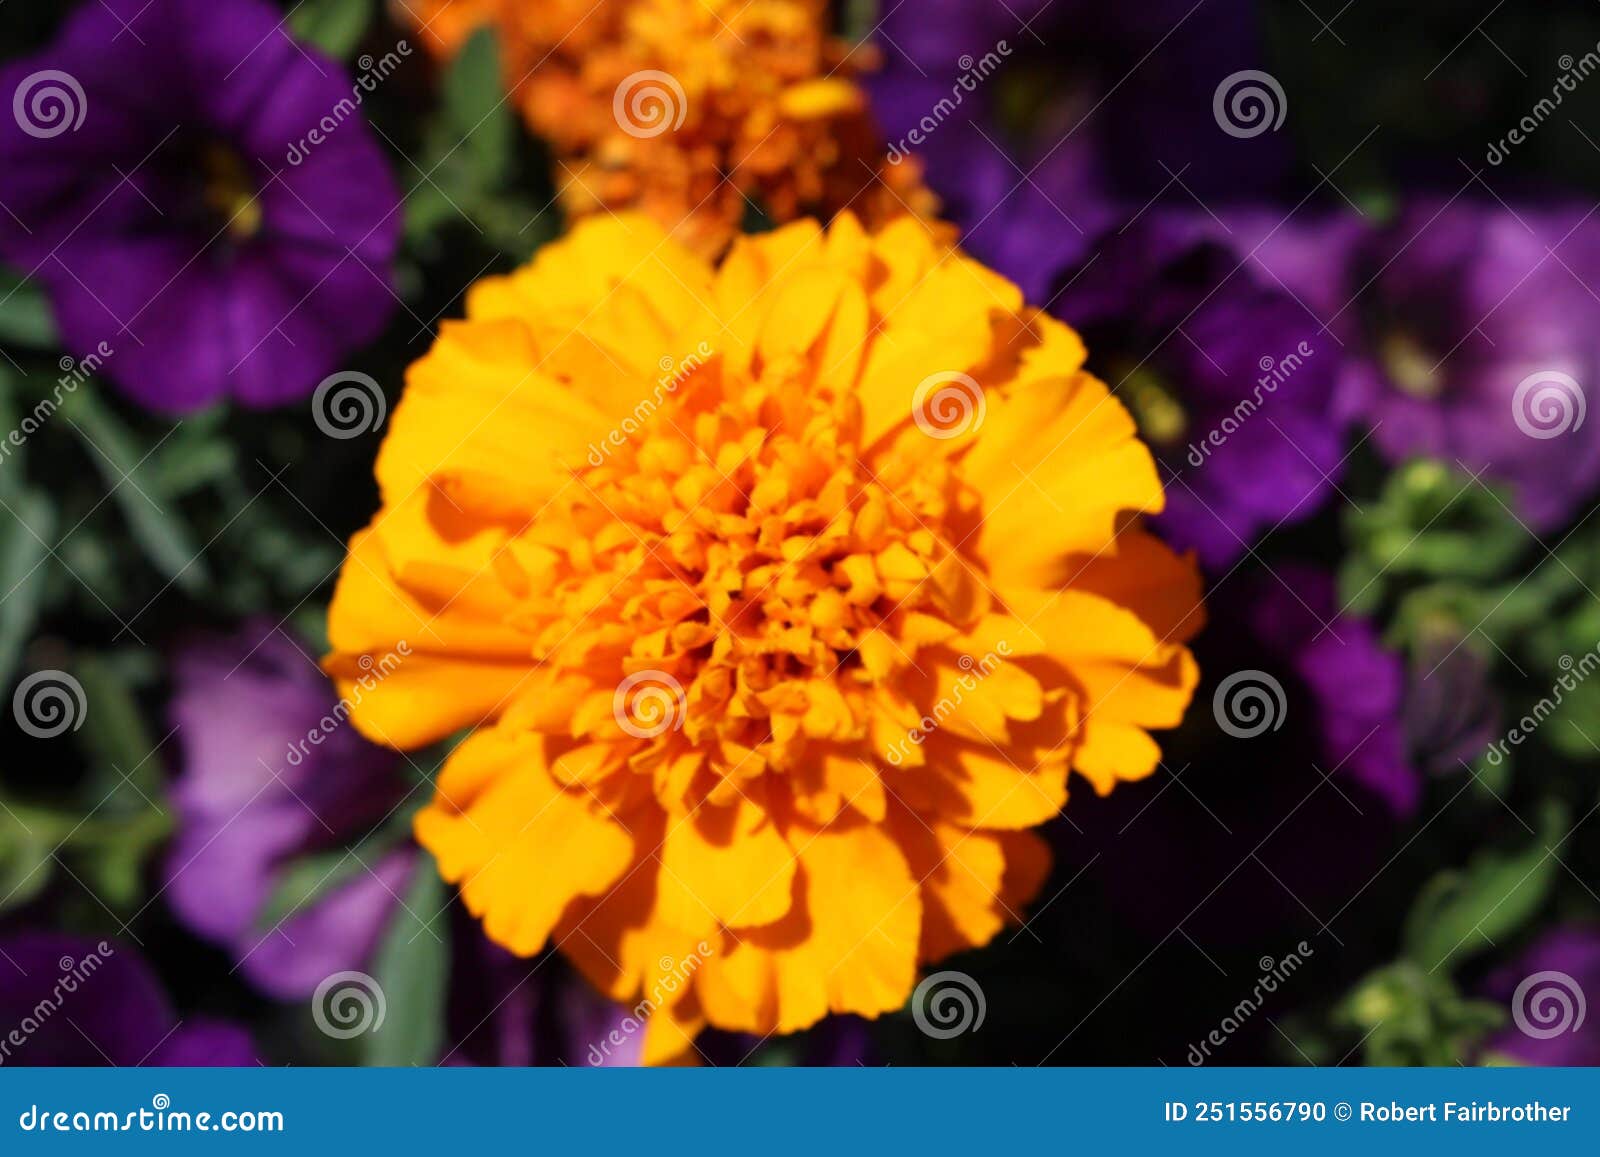 Marigold Blossom Over Purple and Green Stock Photo - Image of purple ...